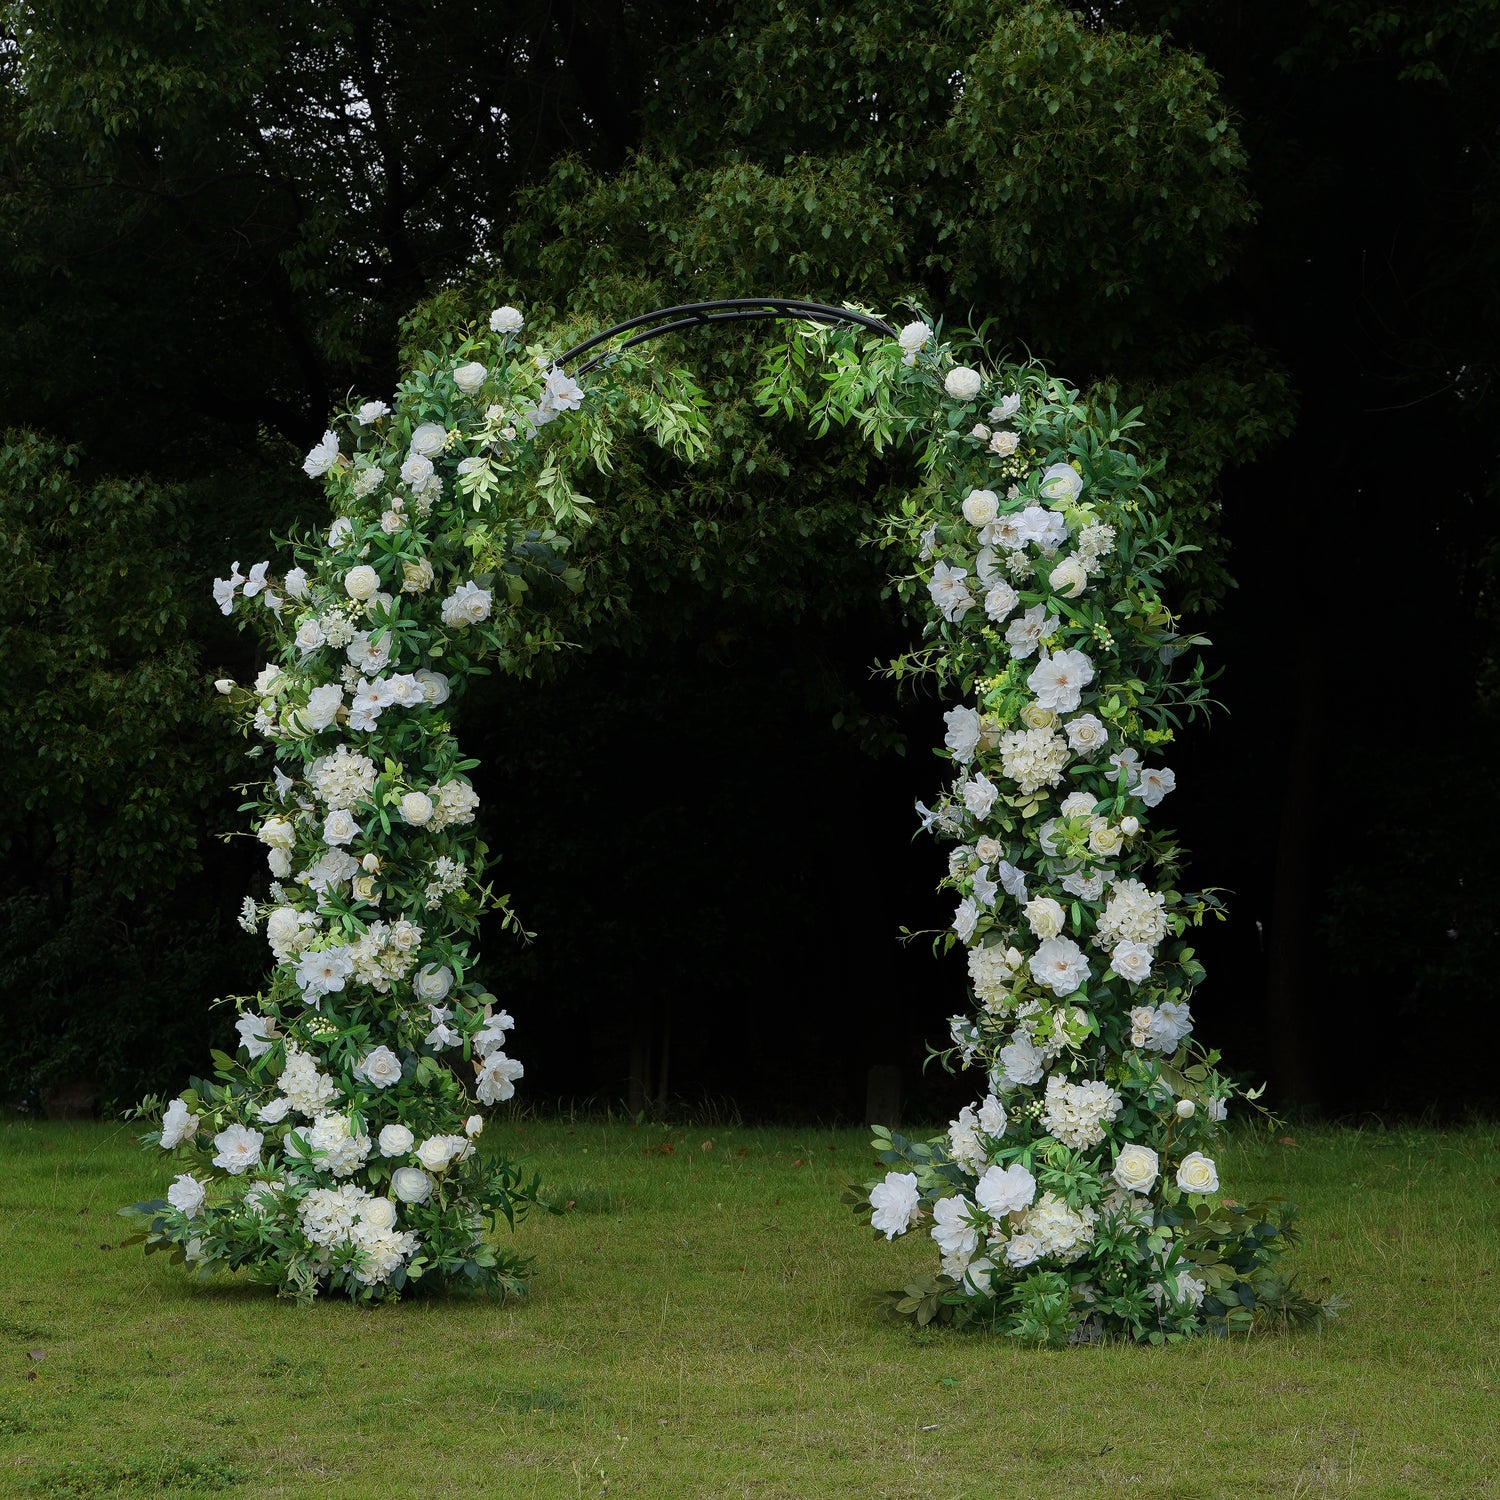 Rose Morning Spirit Flower Arch is a floral arch made of artificial flowers for weddings, parties, birthdays and other events. The flower arch is made of metal frame, easy to assemble and disassemble. Big enough for your guests to take pictures and keep. Flower arches are made of high quality material and durable. The color of the floral arch can be chosen according to your wedding theme. A floral arch is the perfect decoration for any occasion and is sure to impress your guests.